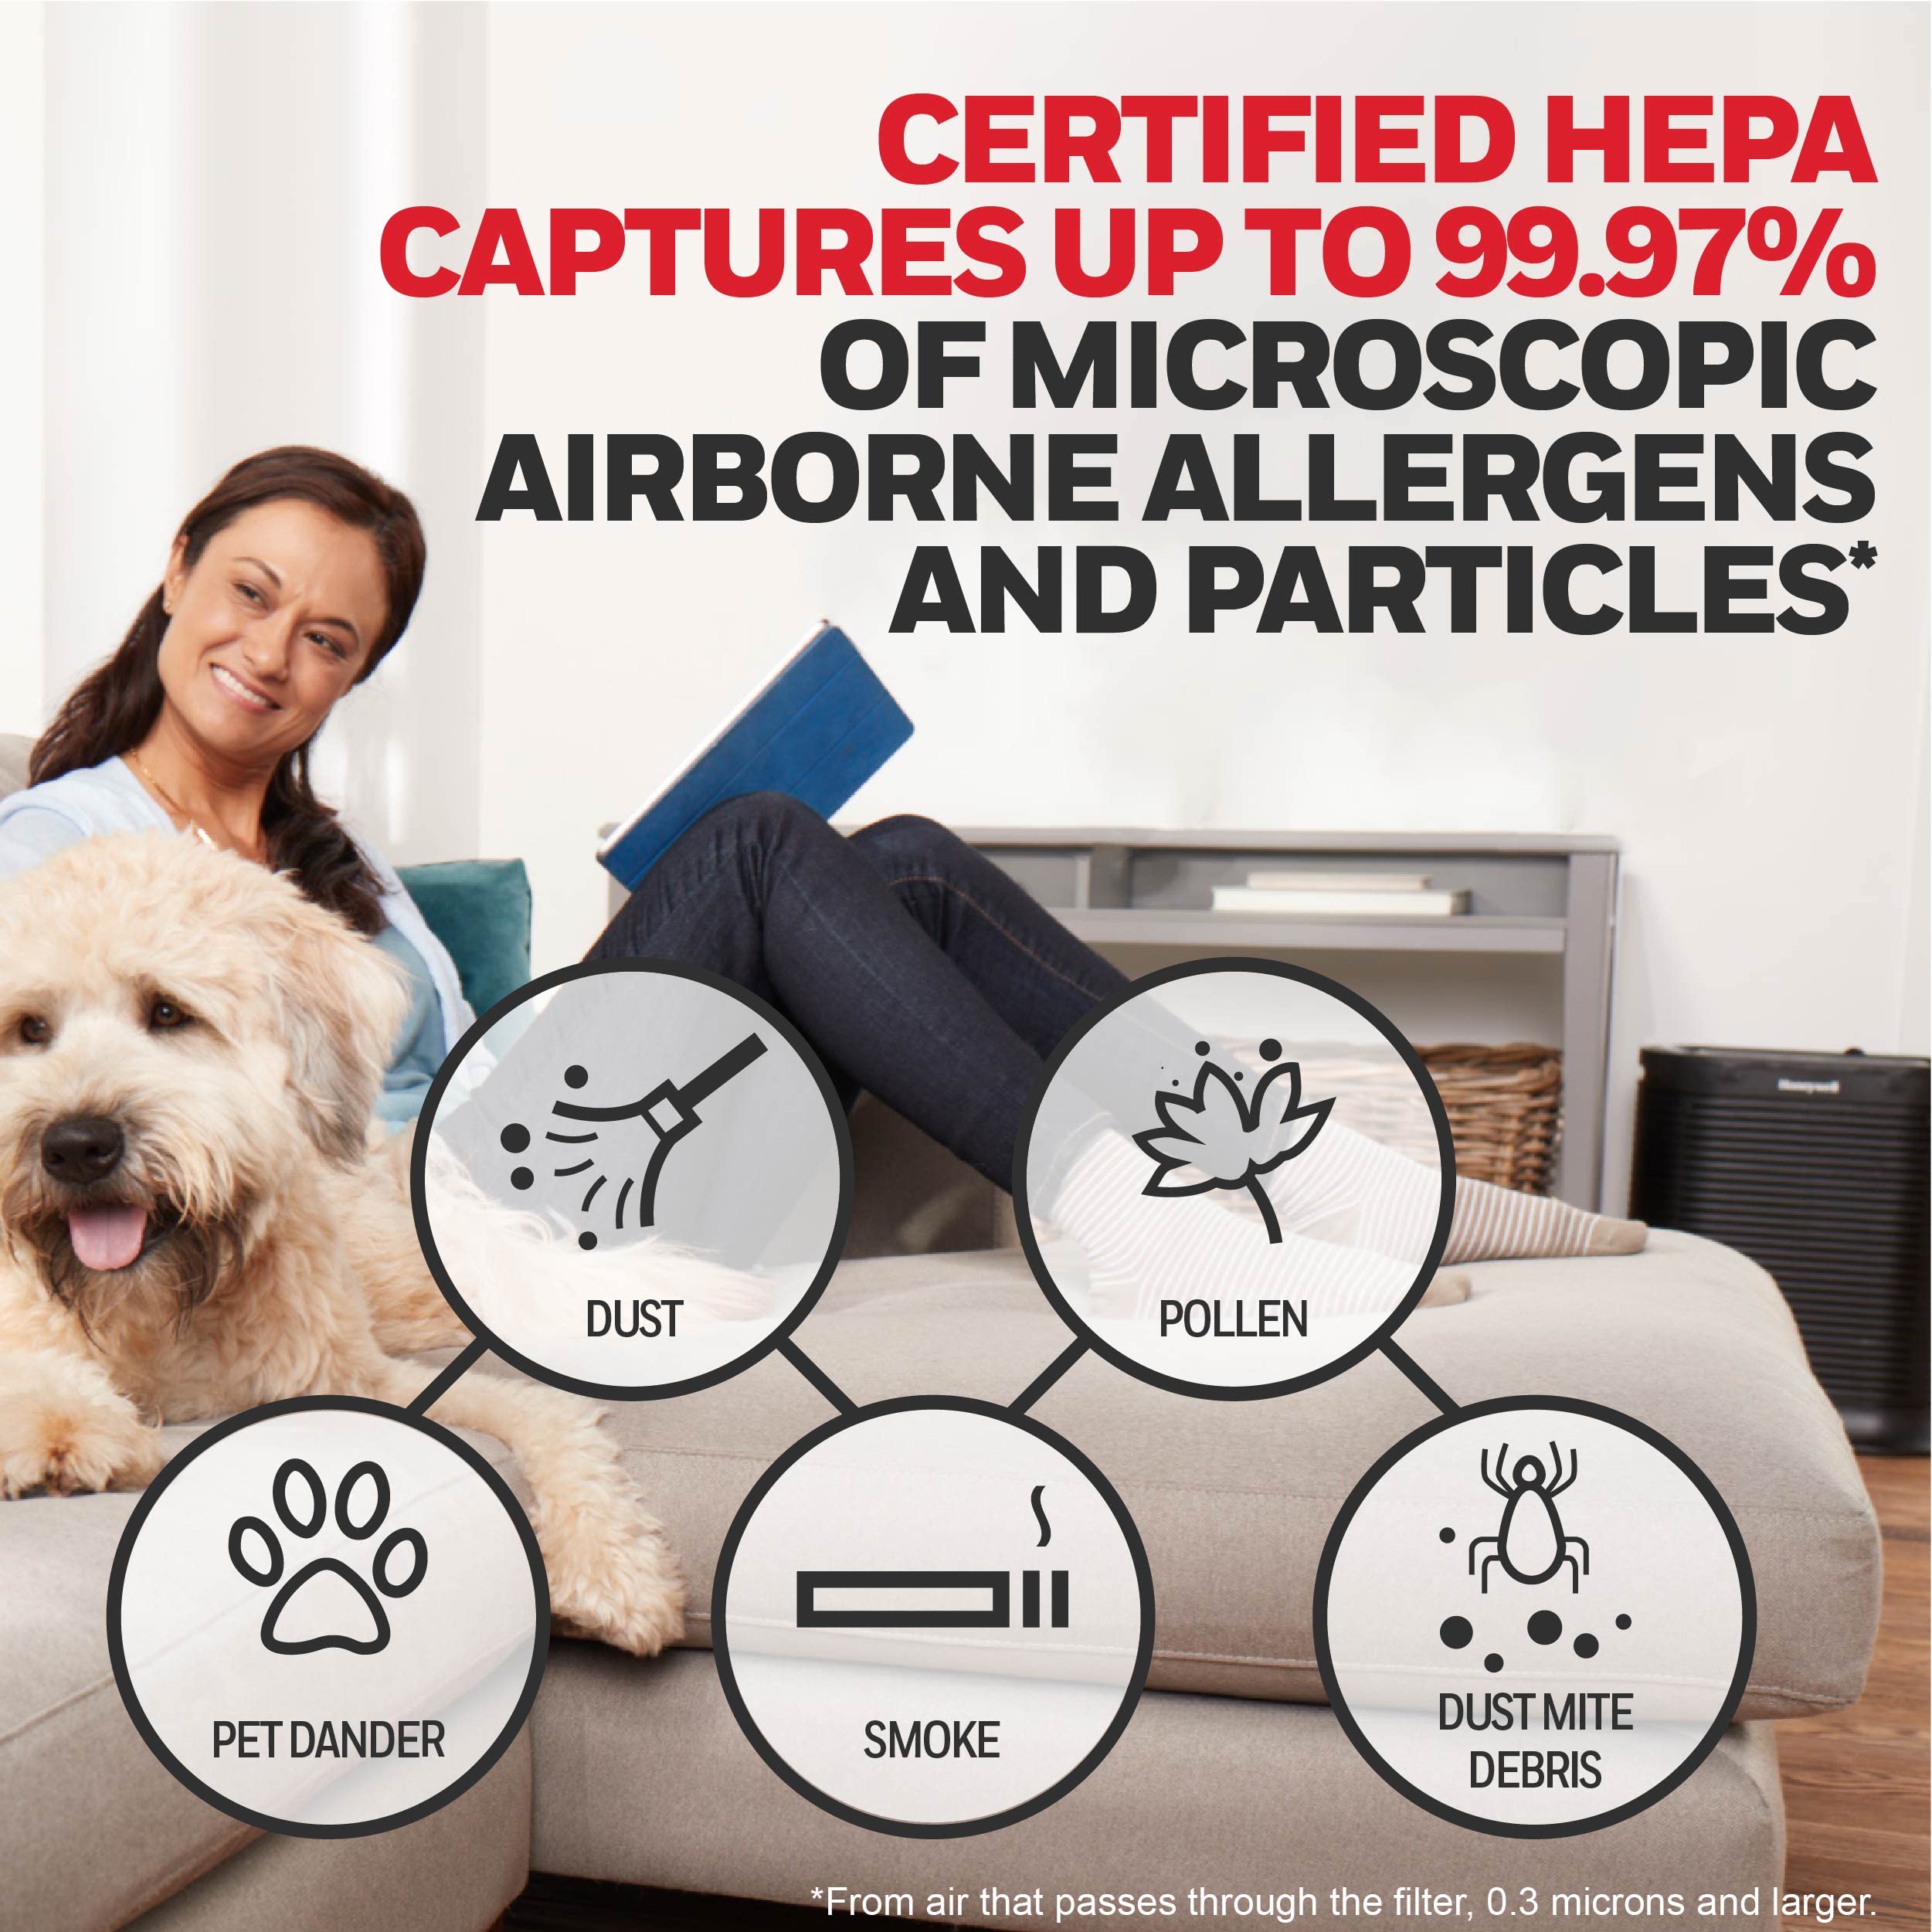 Honeywell HEPA Air Purifier Filter R, 2-Pack for HPA 100/200/300 and 5000 Series - Airborne Allergen Air Filter Targets Wildfire/Smoke, Pollen, Pet Dander, and Dust